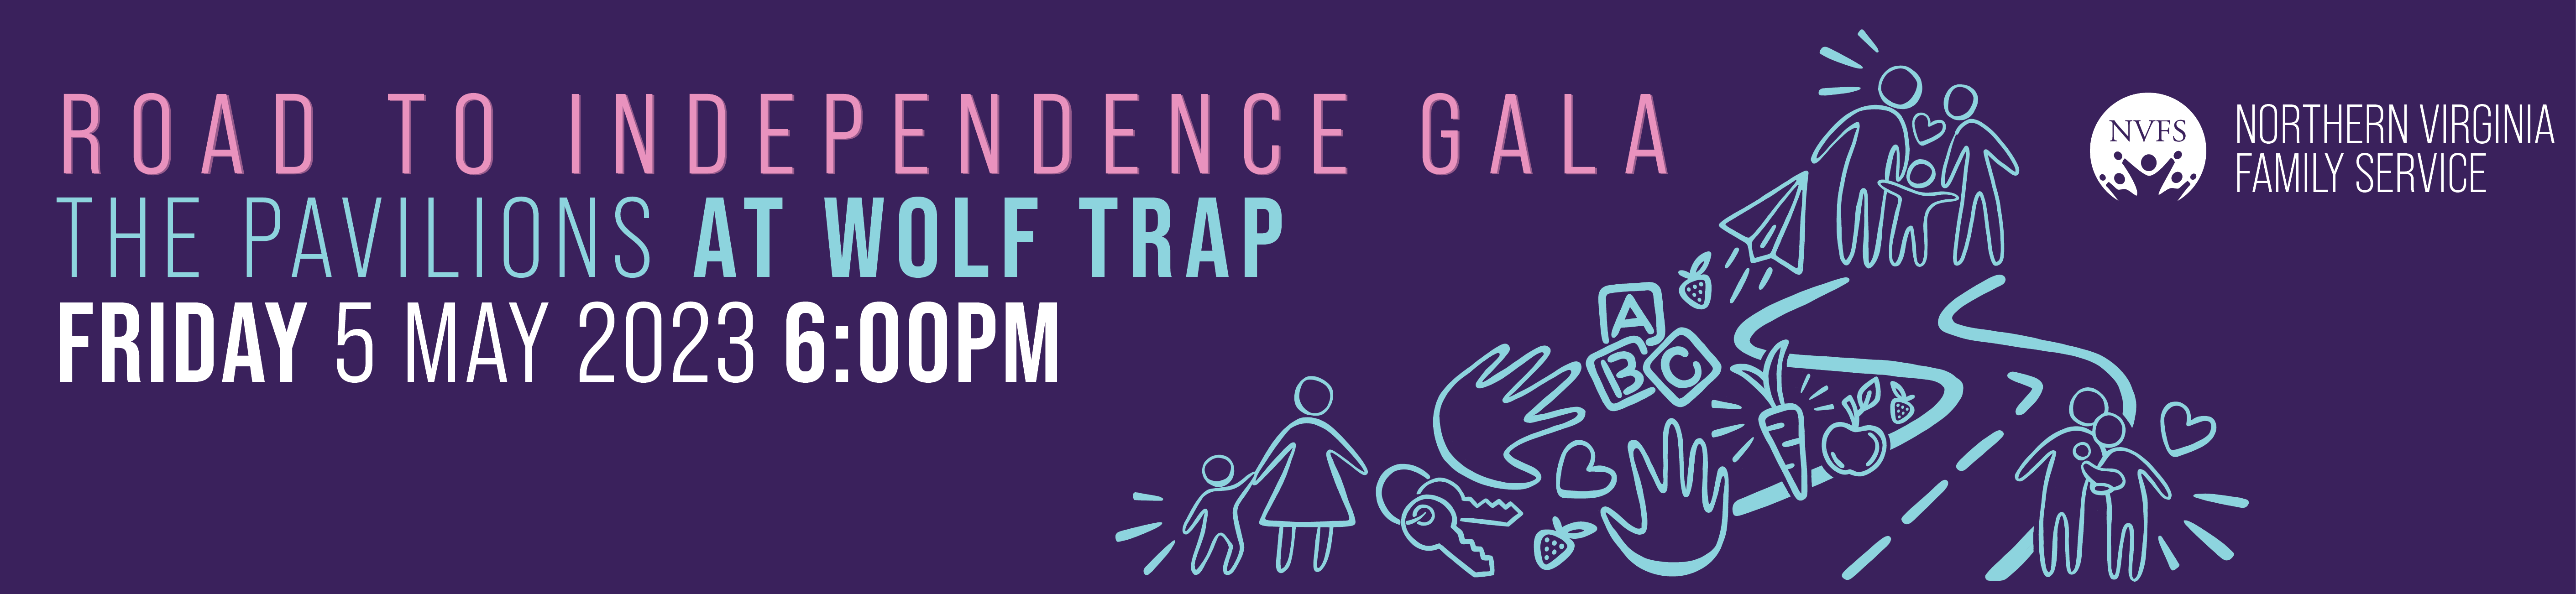 Road to Independence Gala The Pavilions at Wolf Trap Friday 13 May 2022 6 pm